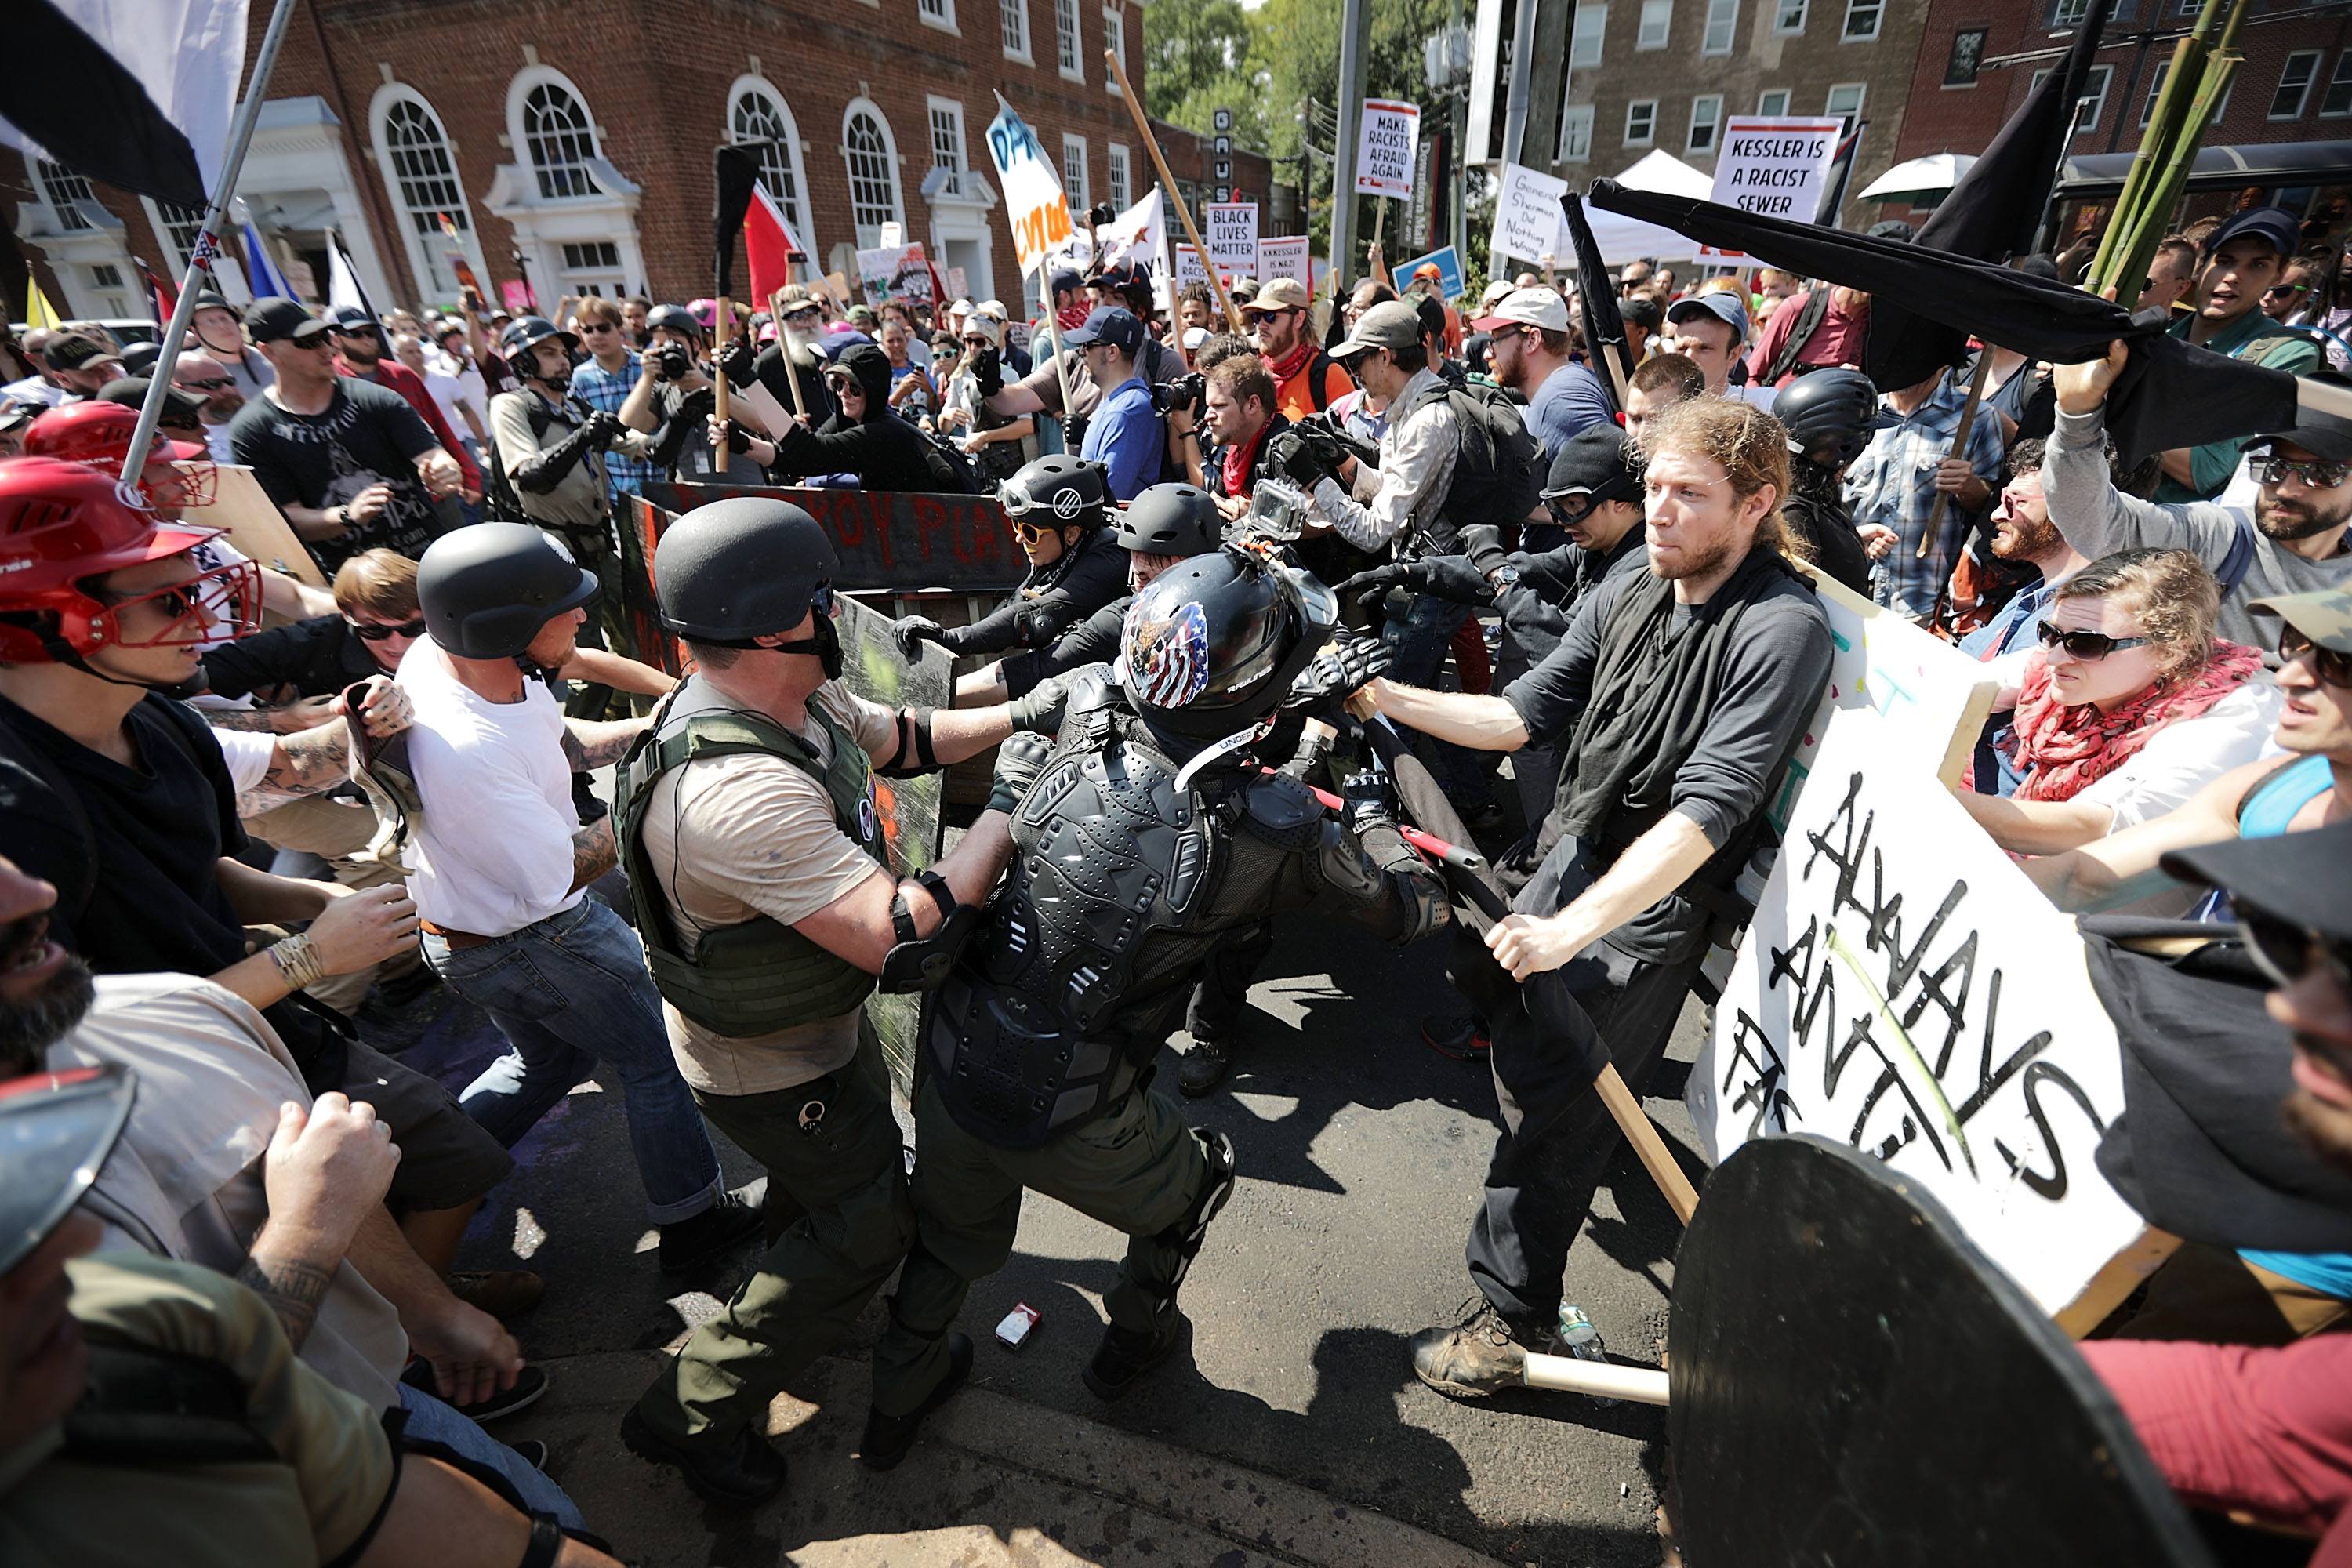 Violence erupts at the Unite the Right rally in Charlottesville